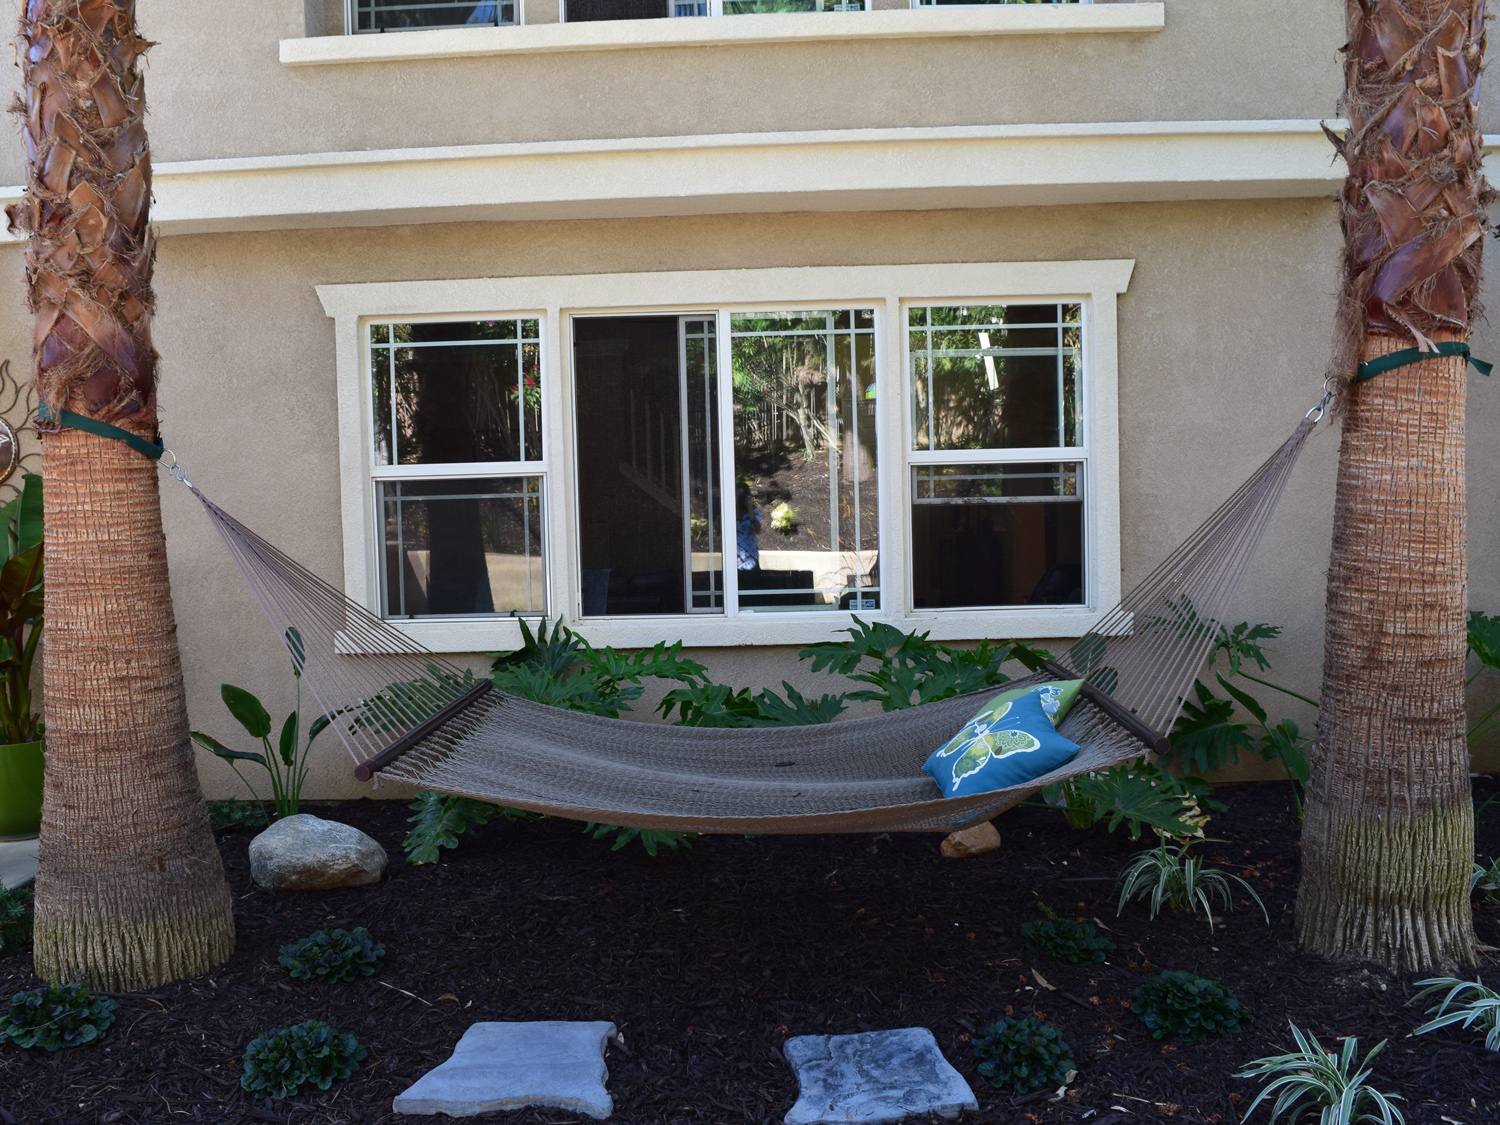 Hammock space between palms in Temecula McCabe's Landscape Construction